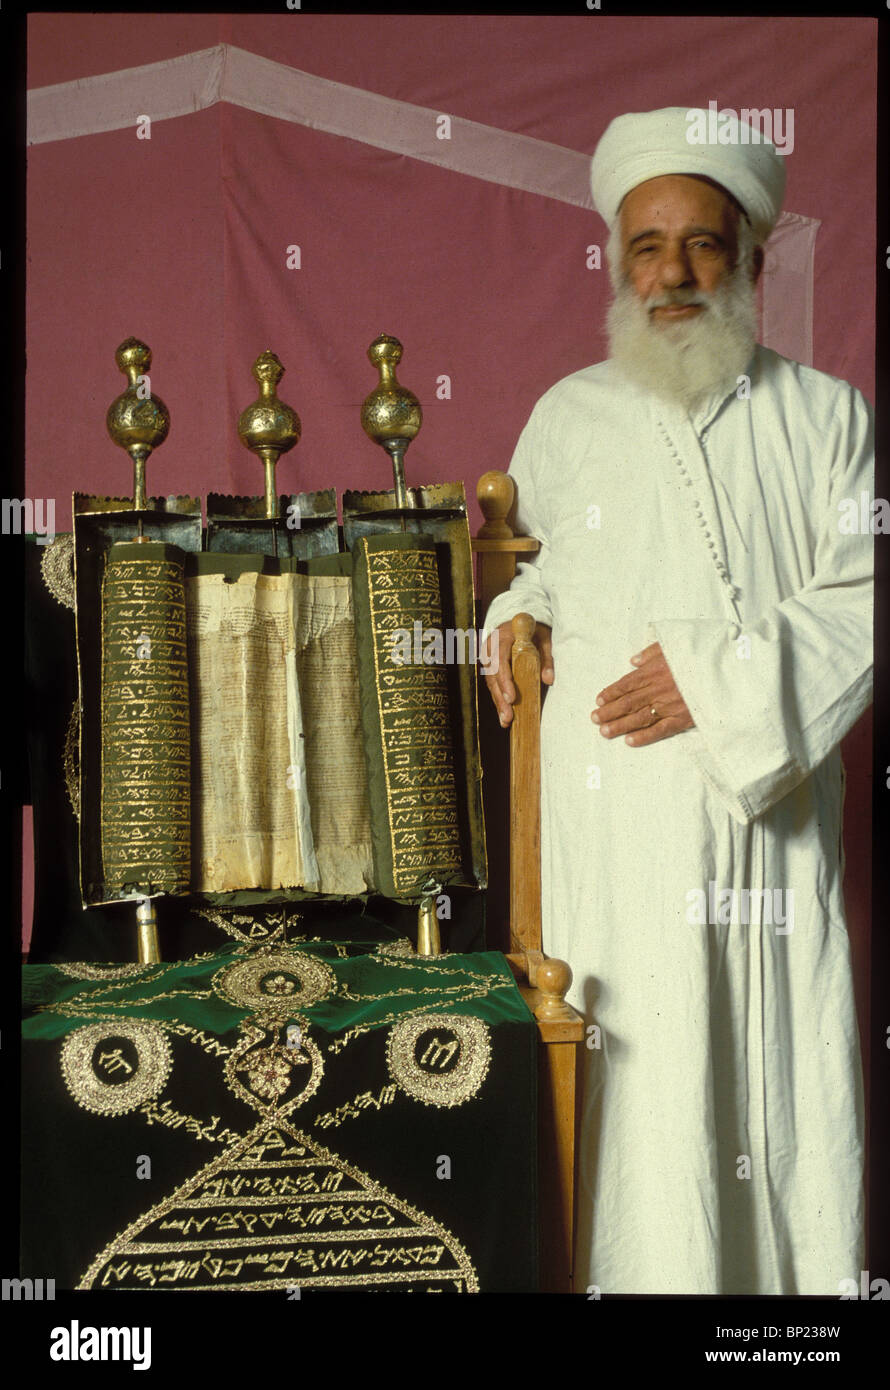 150. SAMARITAN PRIEST WITH THE ANCIENT SAMARITAN PENTATEUCH DATING FROM THE 17TH. C. IN THE SAMARITAN SYNAGOGUE IN NABLUS Stock Photo